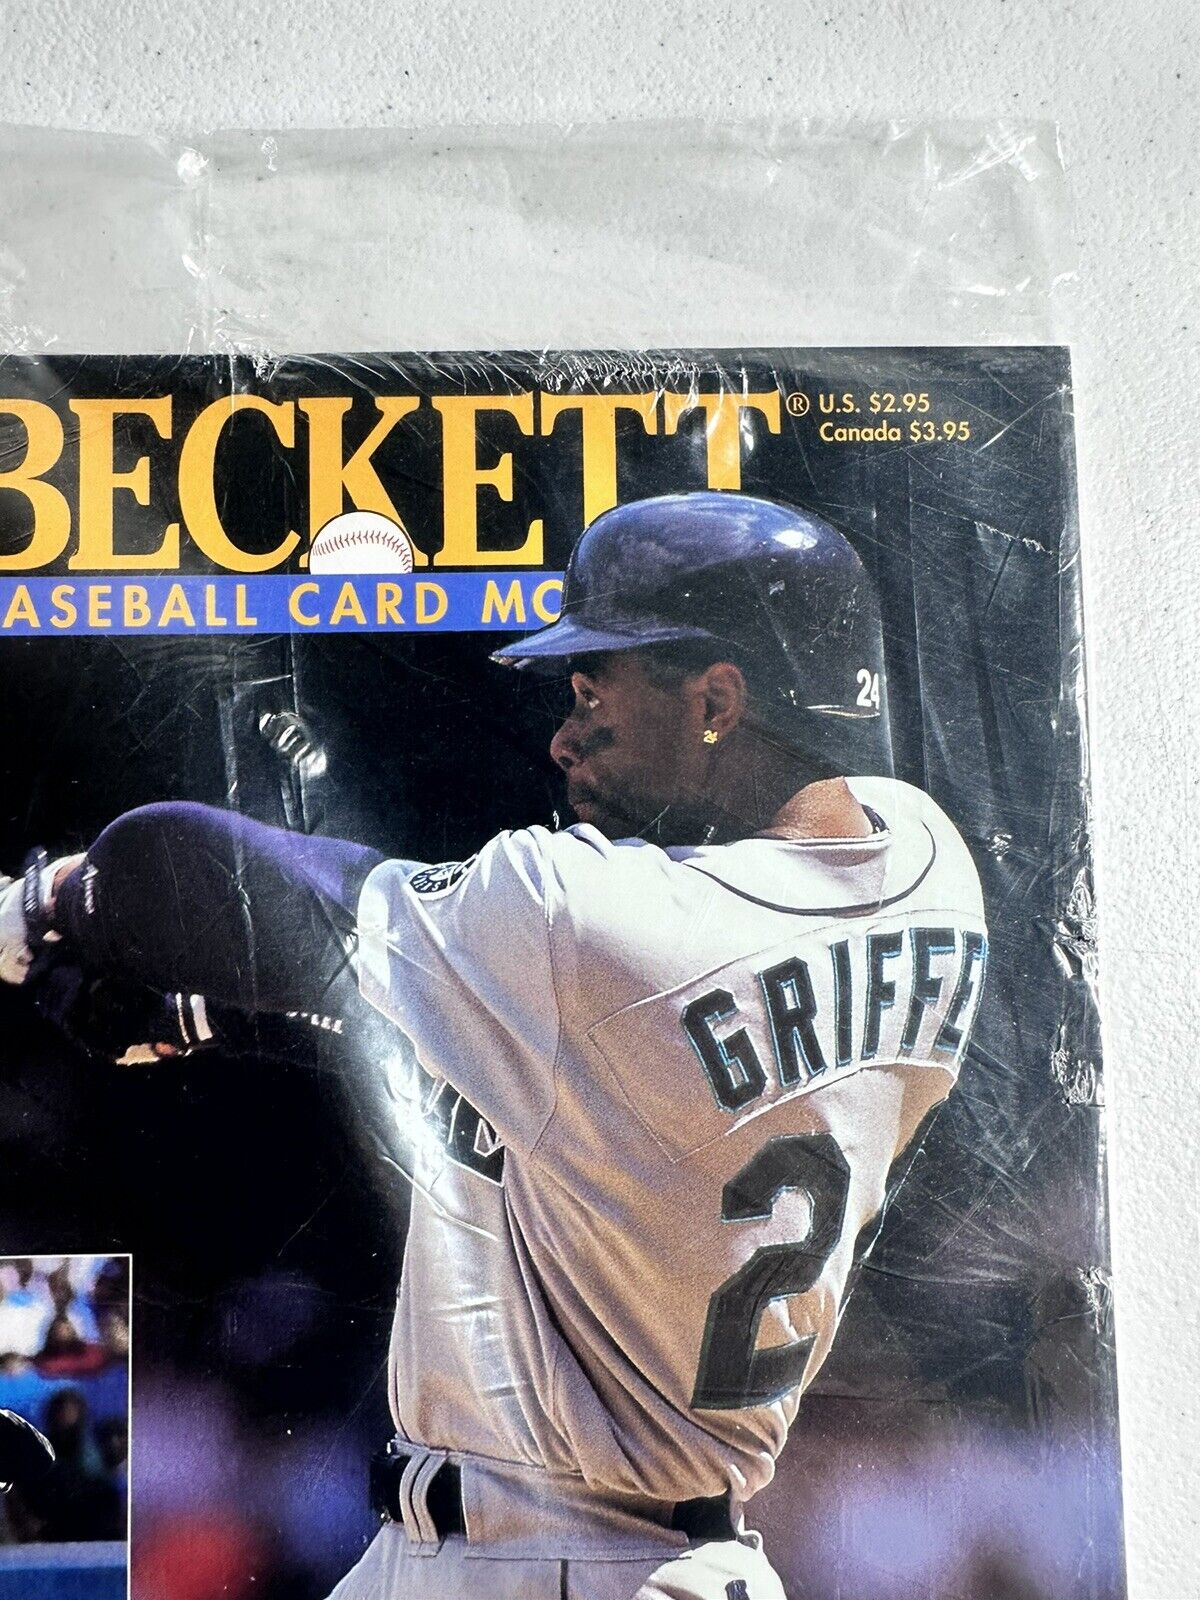 Mint Condition June 1994 Beckett Magazine Featuring Ken Griffey Jr. - Issue #111 - MLB Mariners Collectible - TreasuTiques